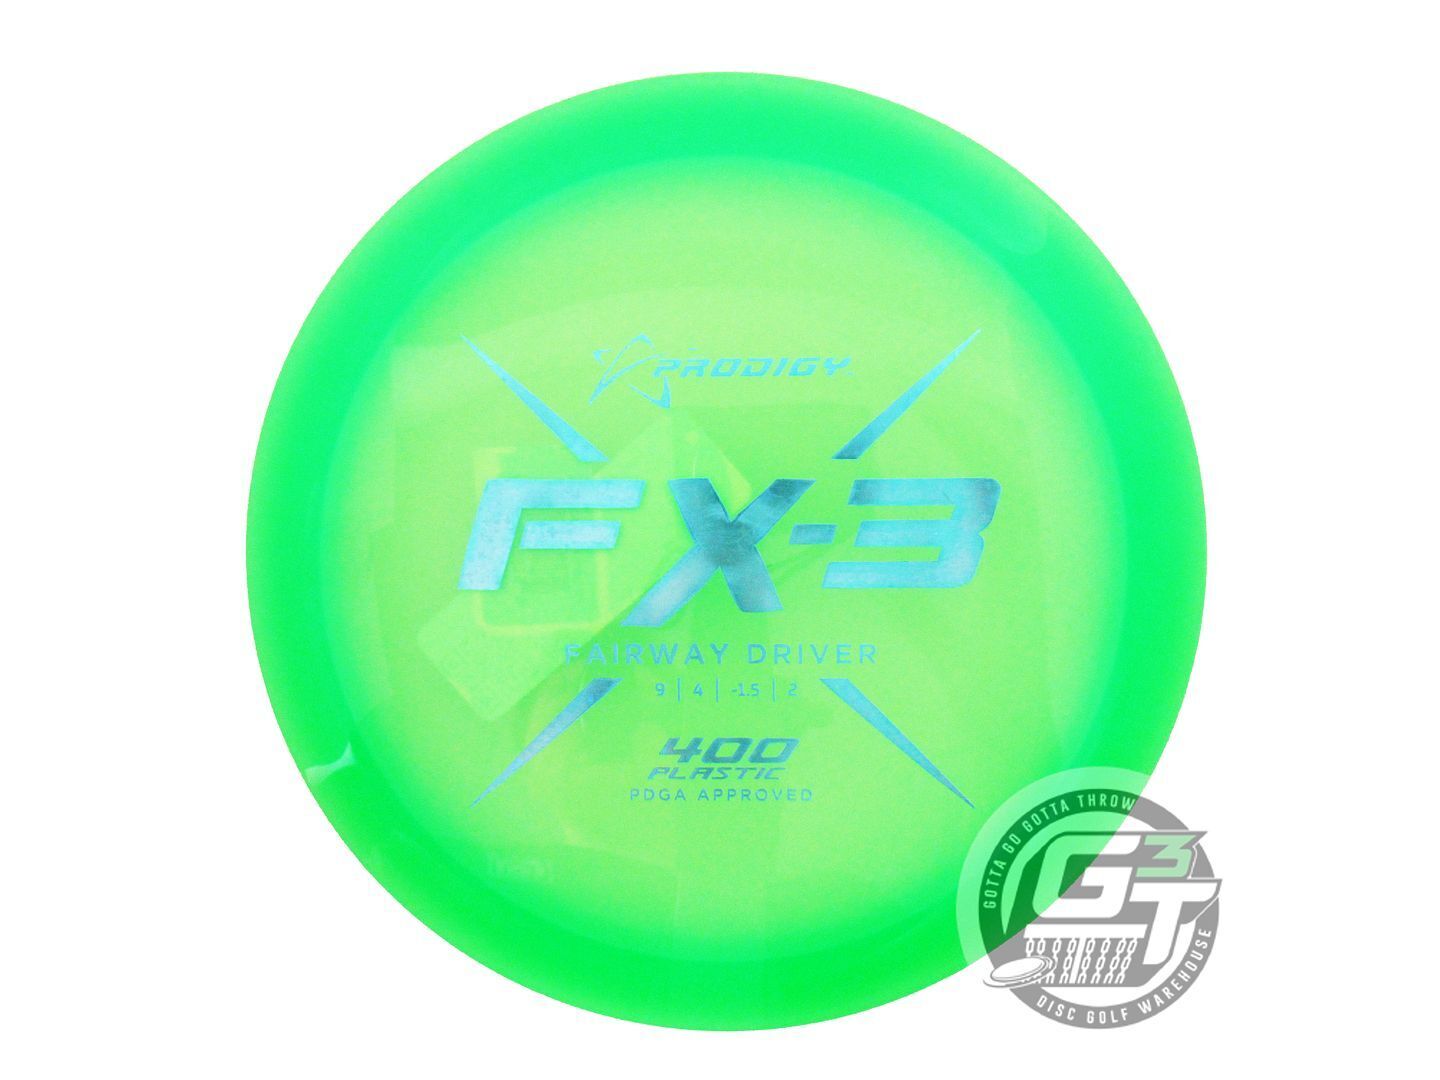 Prodigy 400 Series FX3 Fairway Driver Golf Disc (Individually Listed)